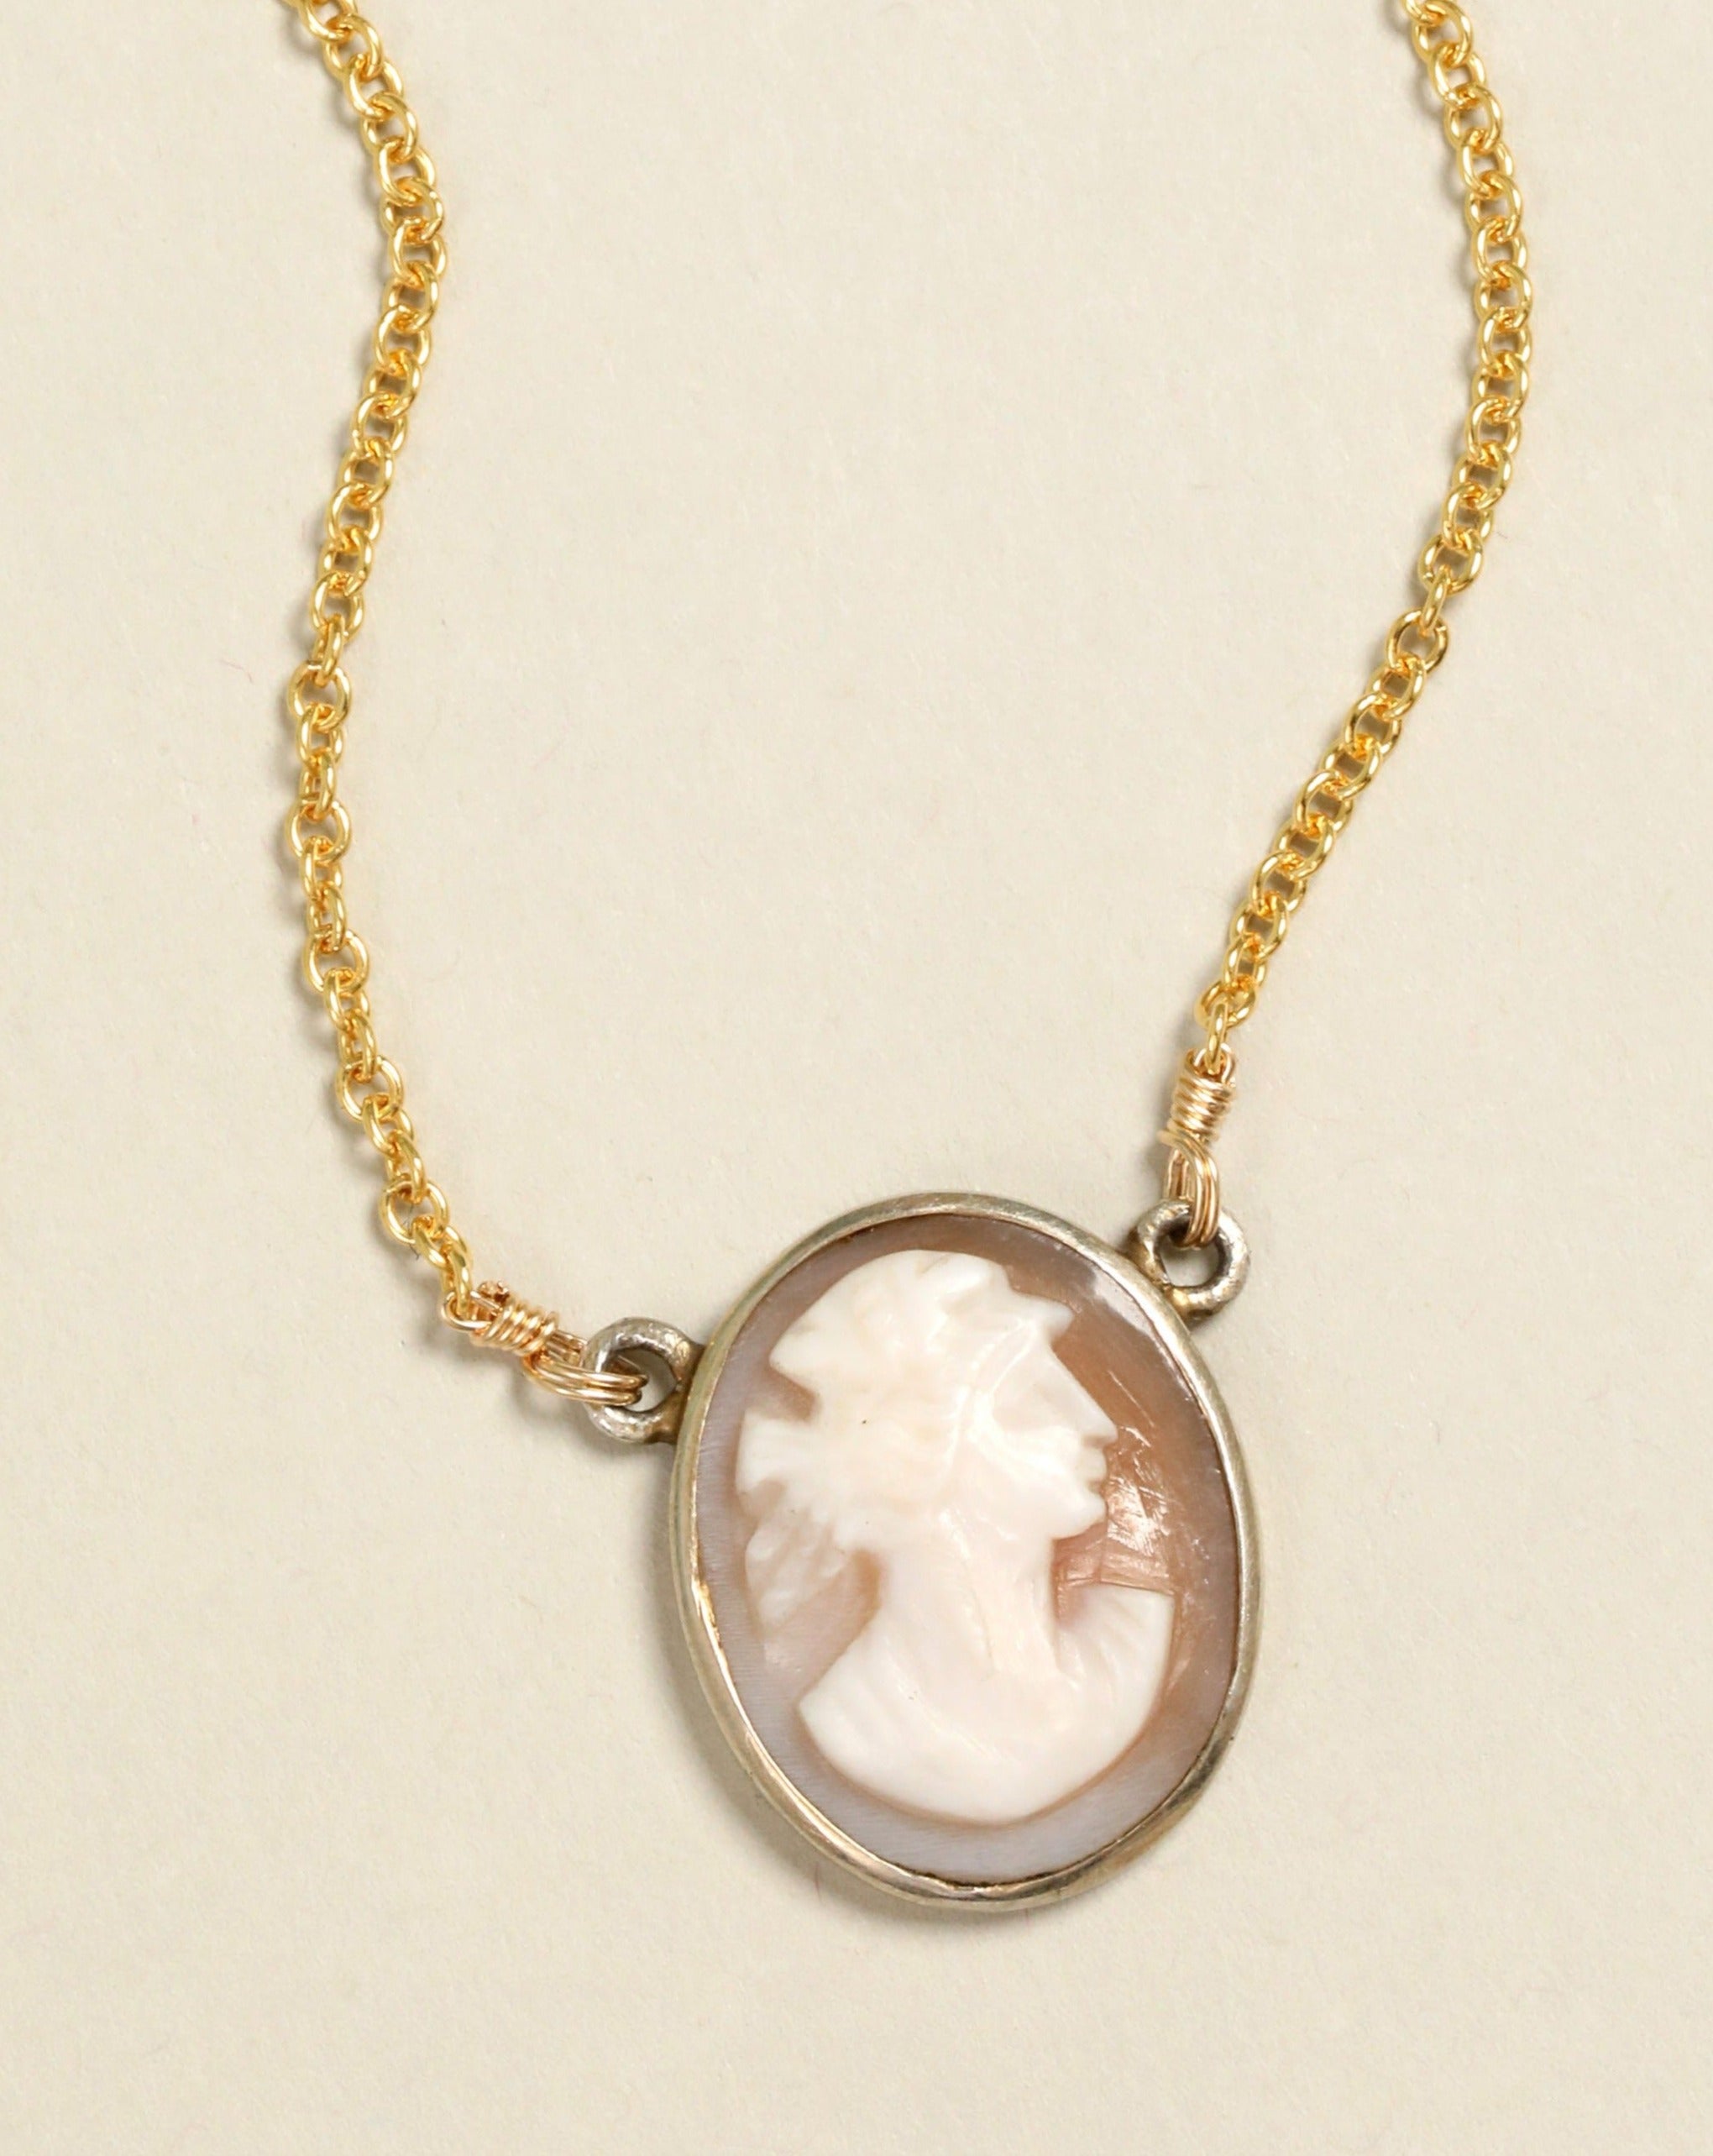 Vintage 9k Gold Small Cameo Pendant with Hat